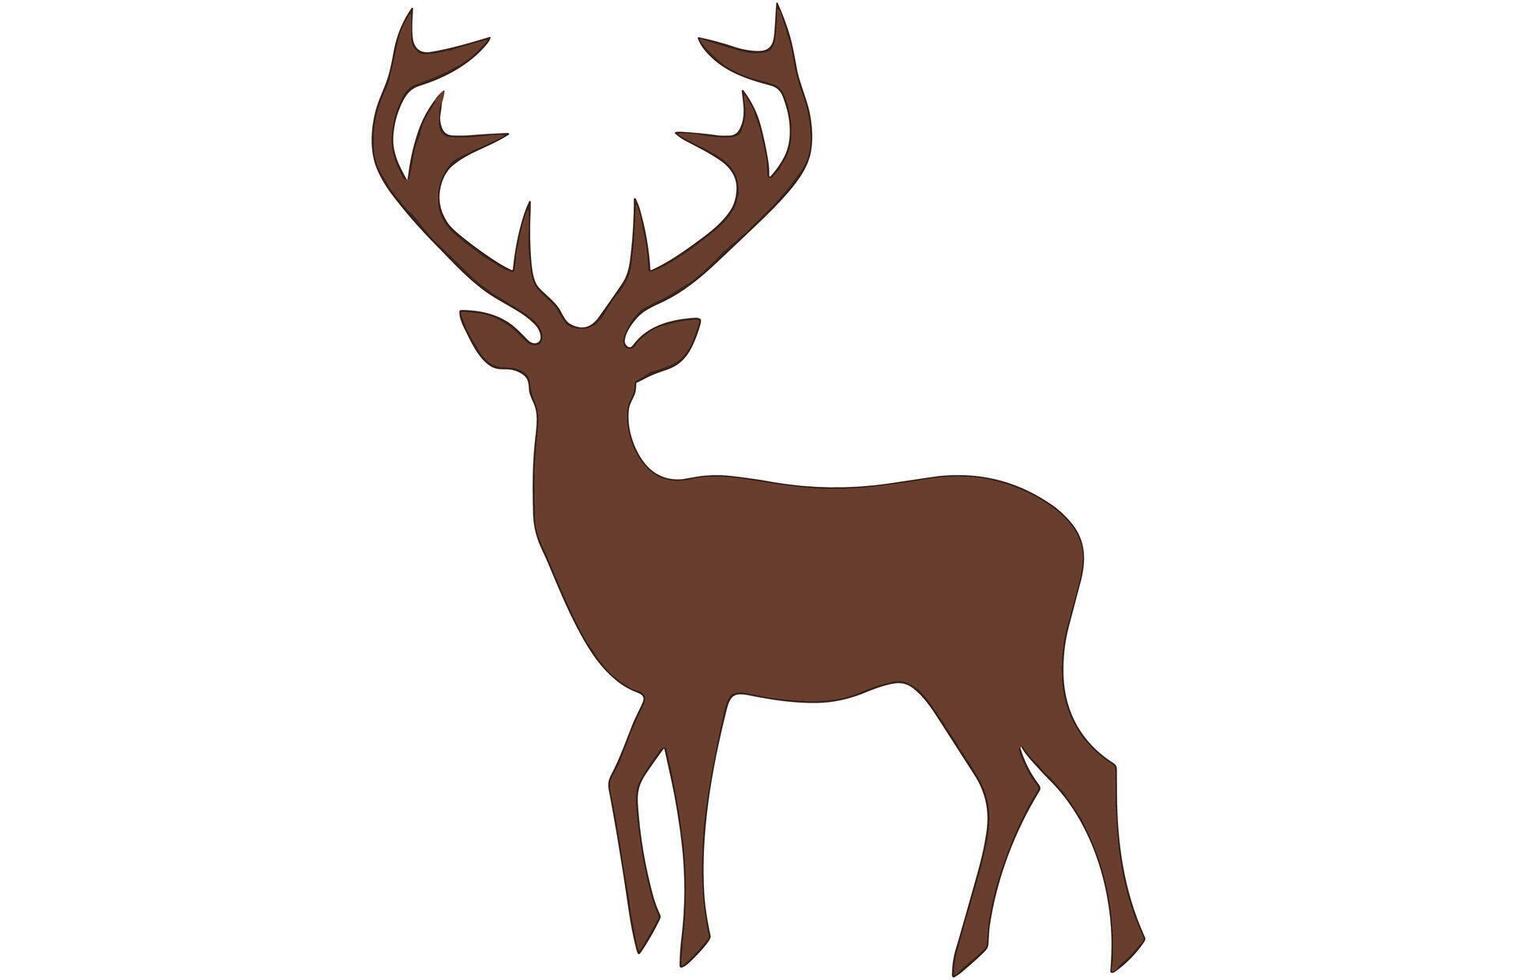 Deer Silhouette Vector illustration free, Antler vector isolated on a white Background